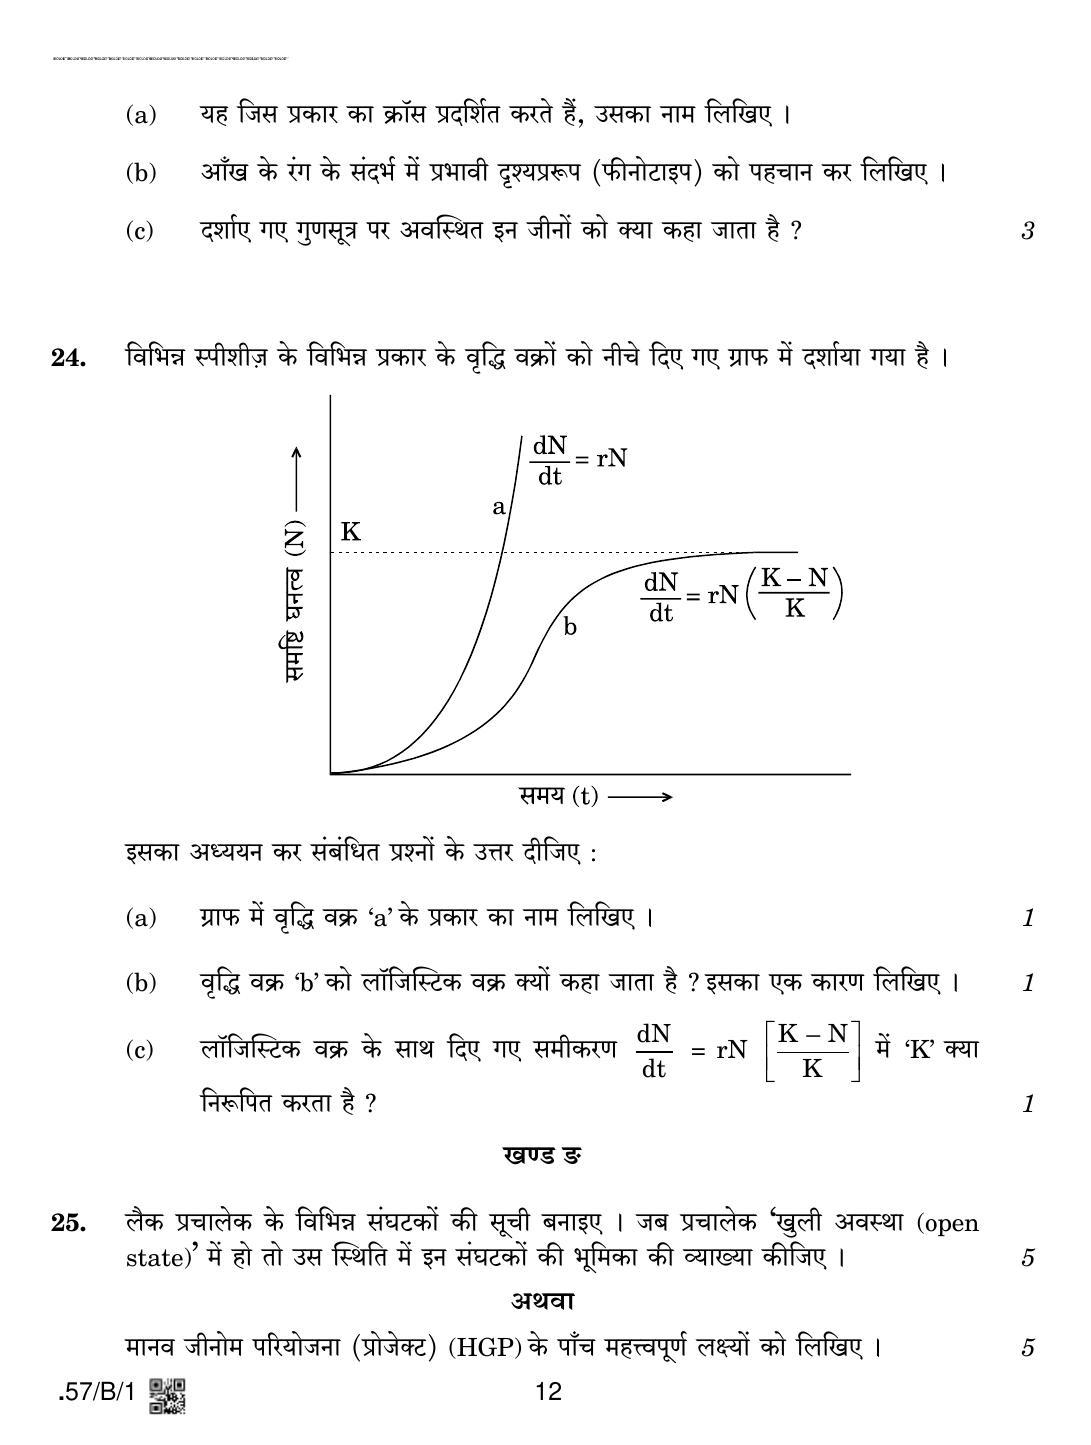 CBSE Class 12 57-C-1 - Biology 2020 Compartment Question Paper - Page 12